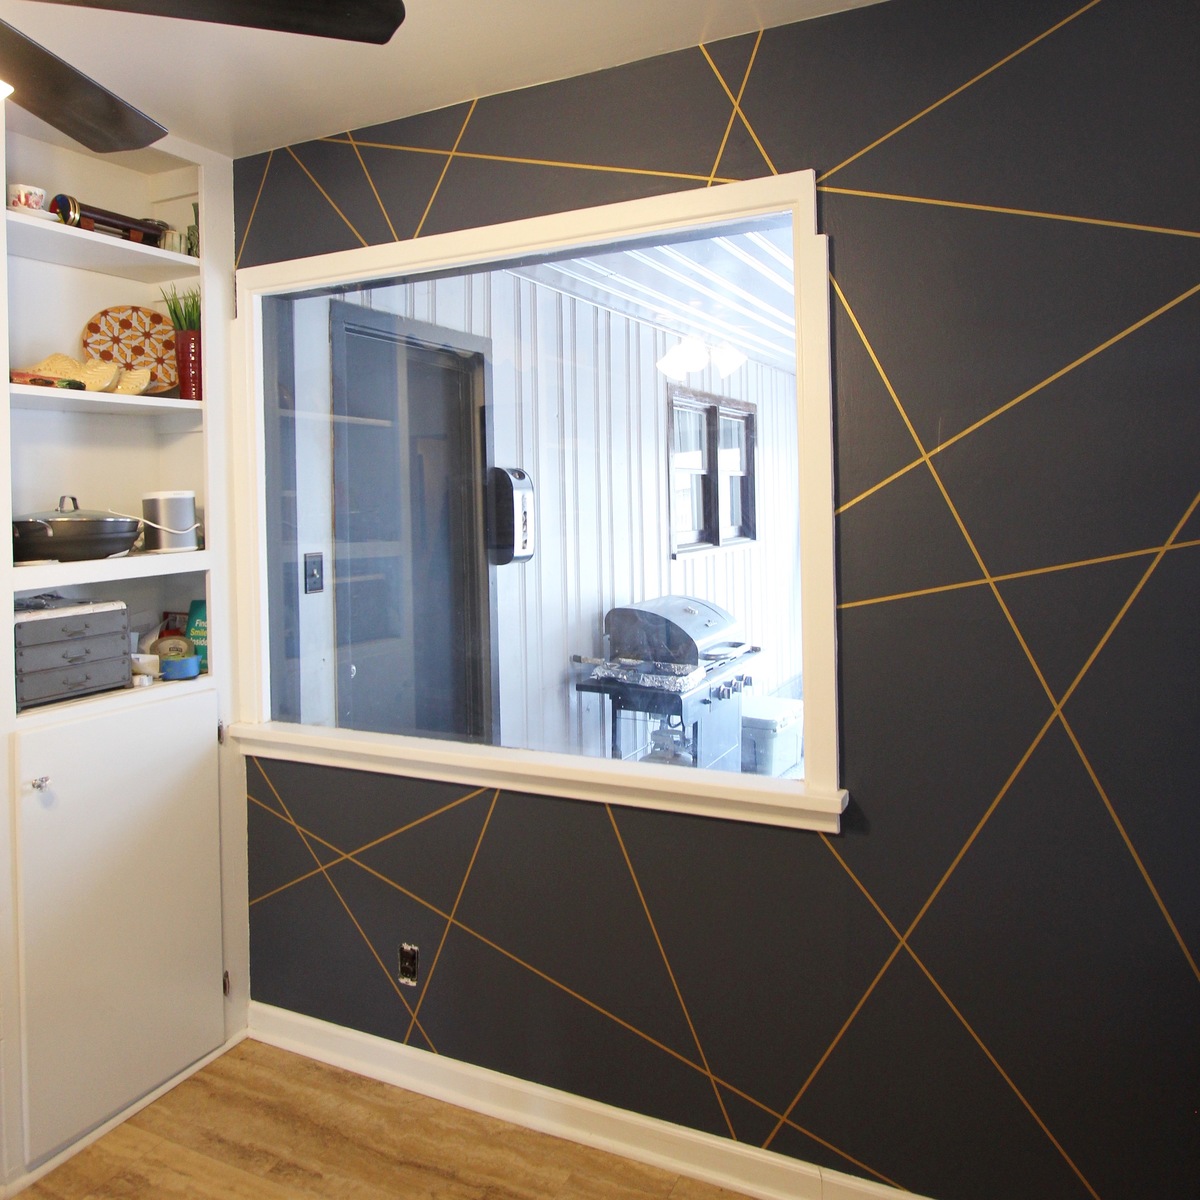 Abstract geometric feature wall!